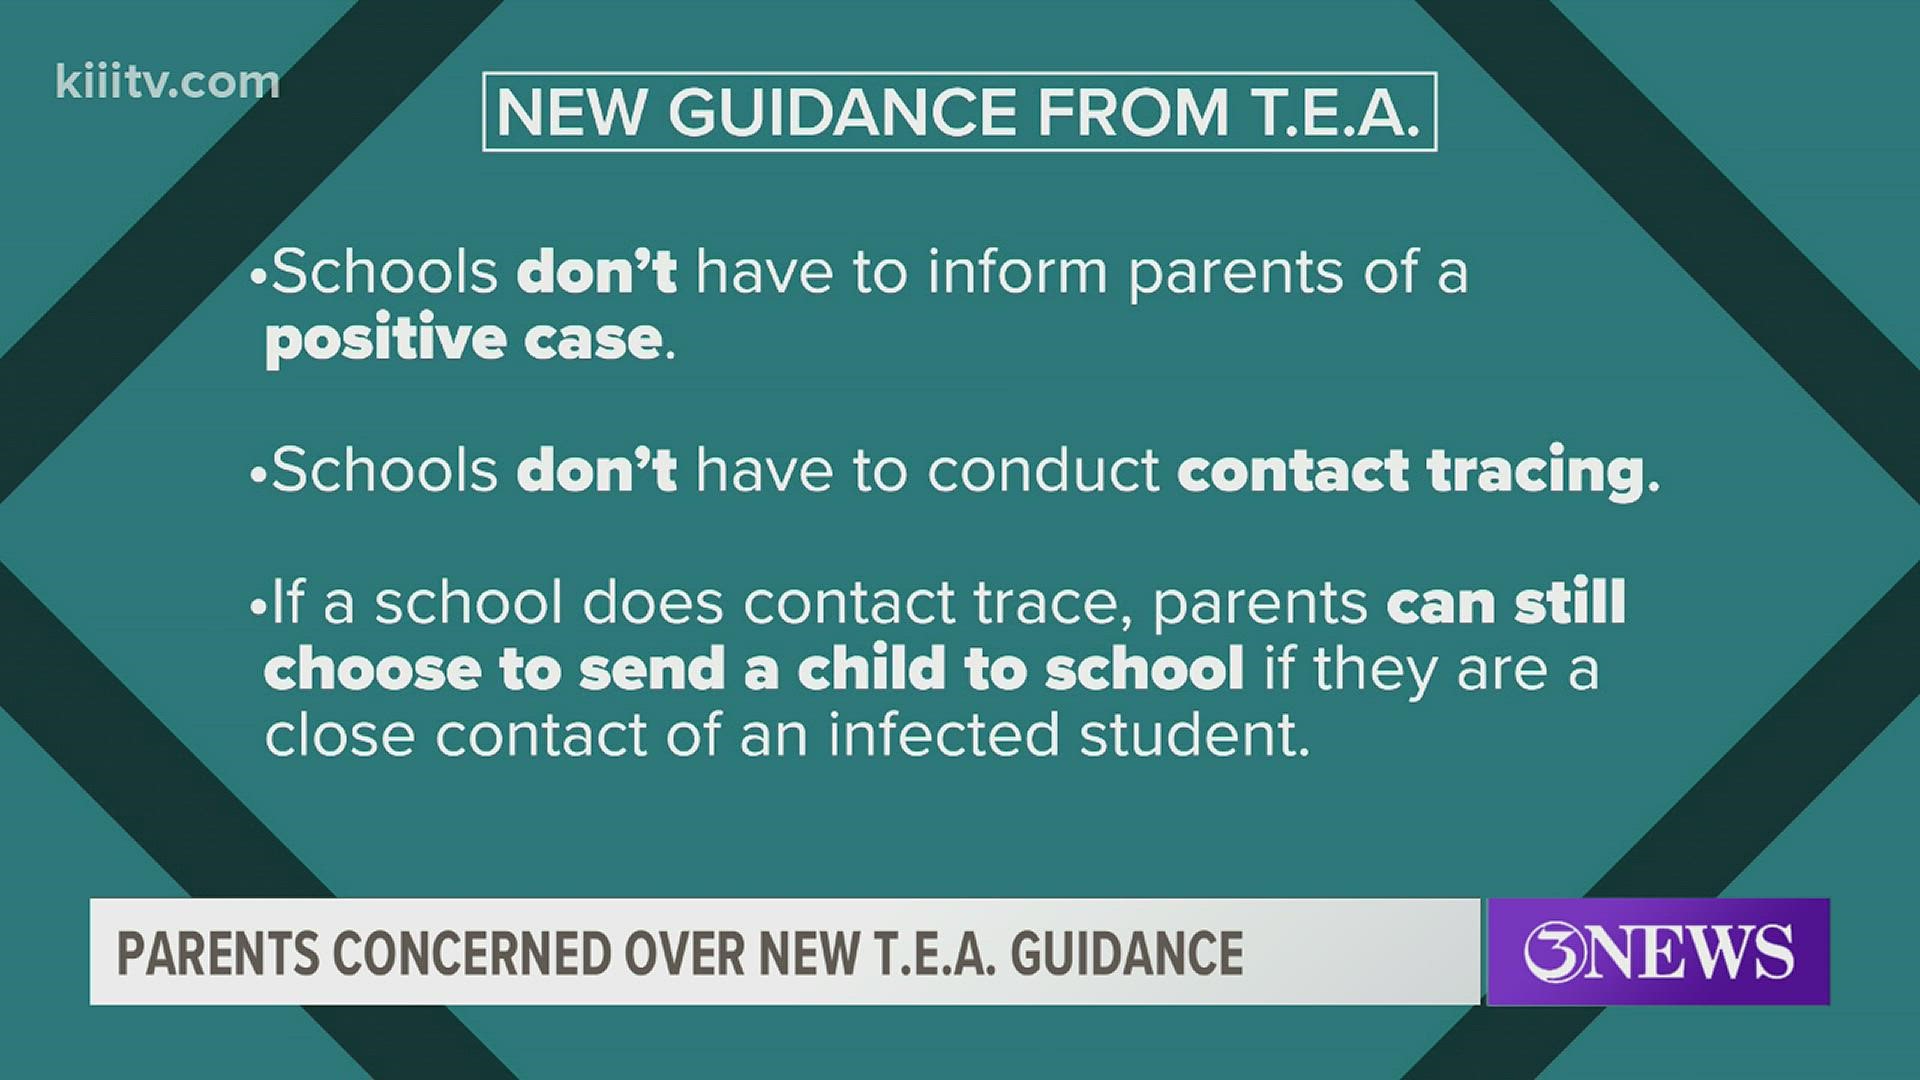 On Thursday, the Texas Education Agency released their public health guidance that a lot of local parents don't agree with.